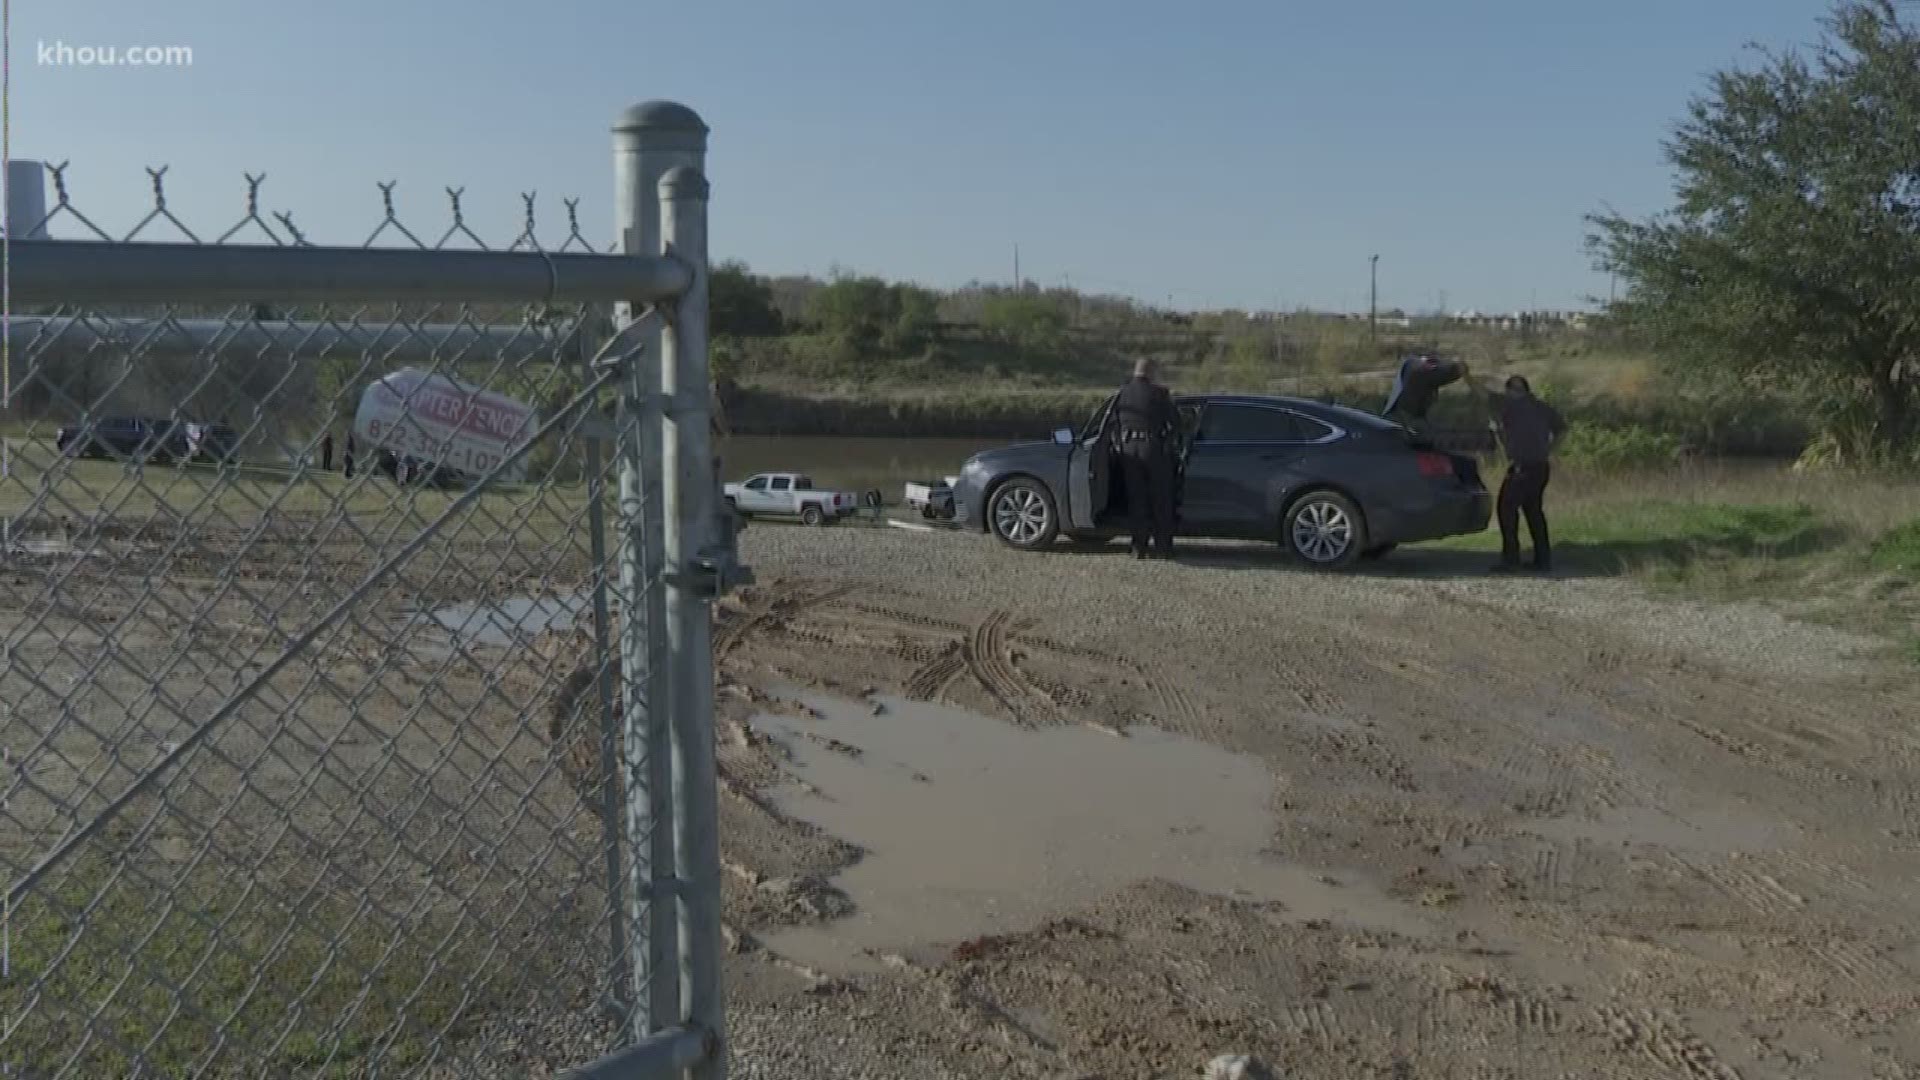 Officials are investigating after a body was found Thursday afternoon in Buffalo Bayou.